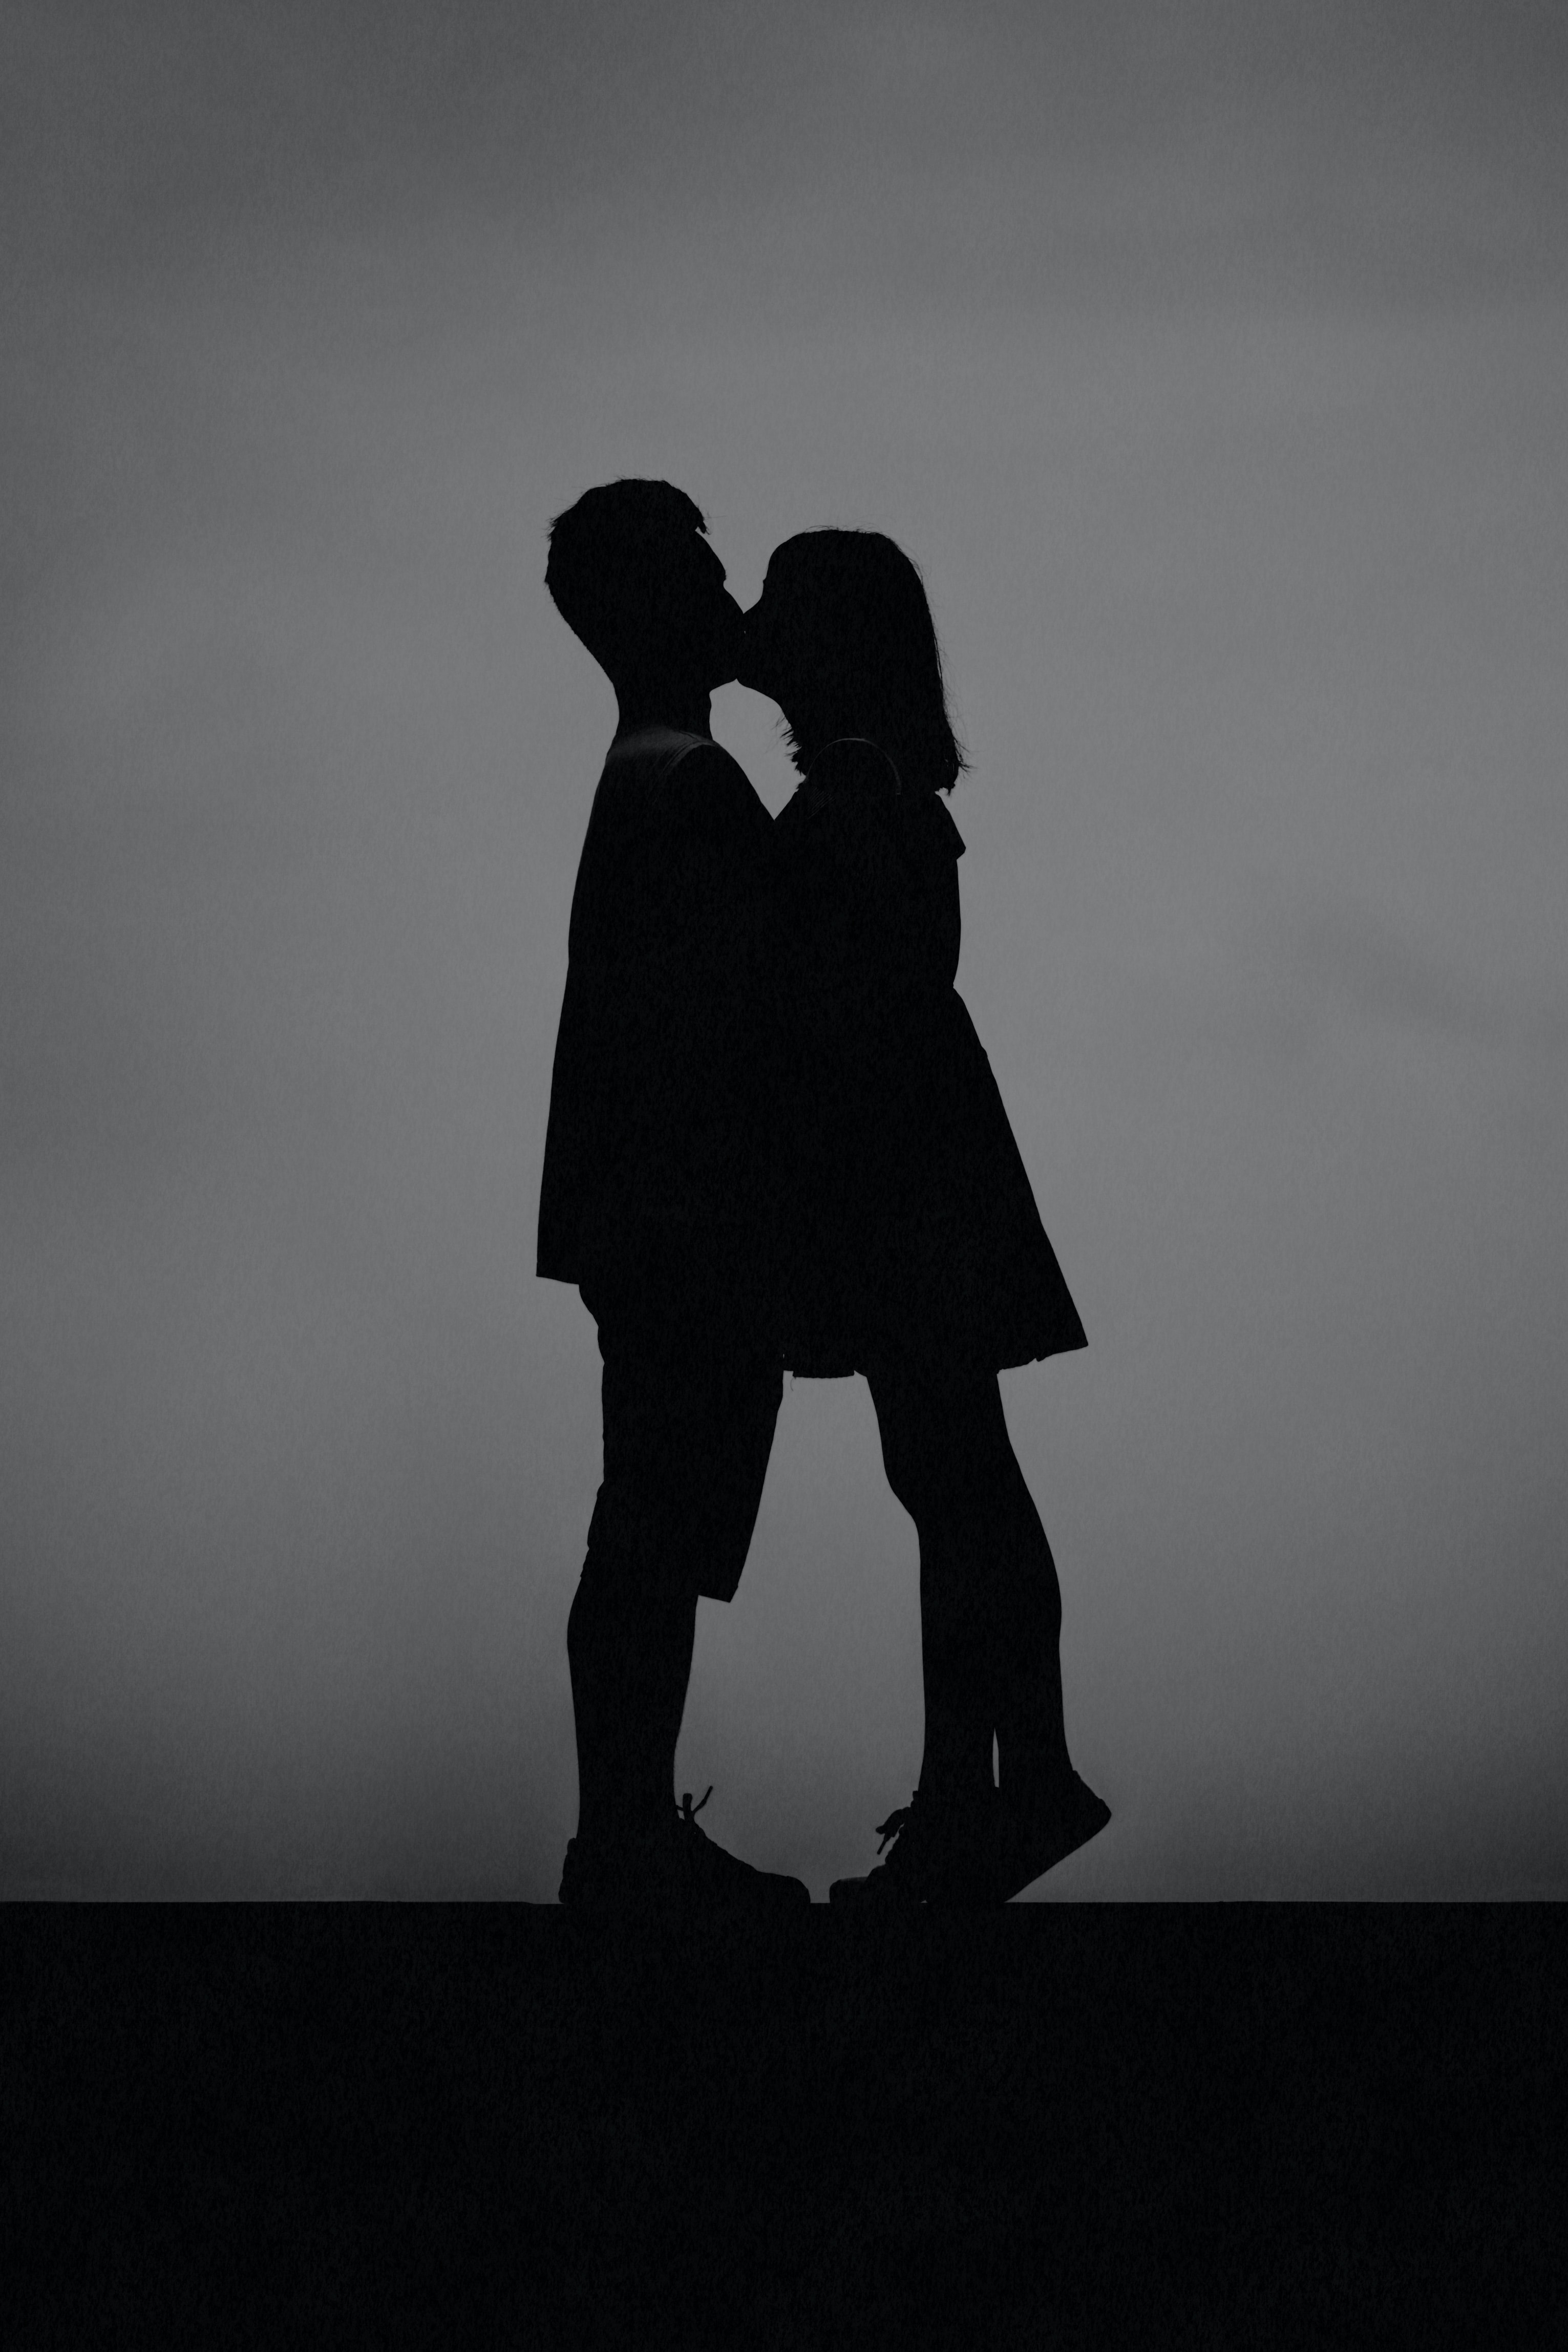 Two people kissing. | Source: Unsplash